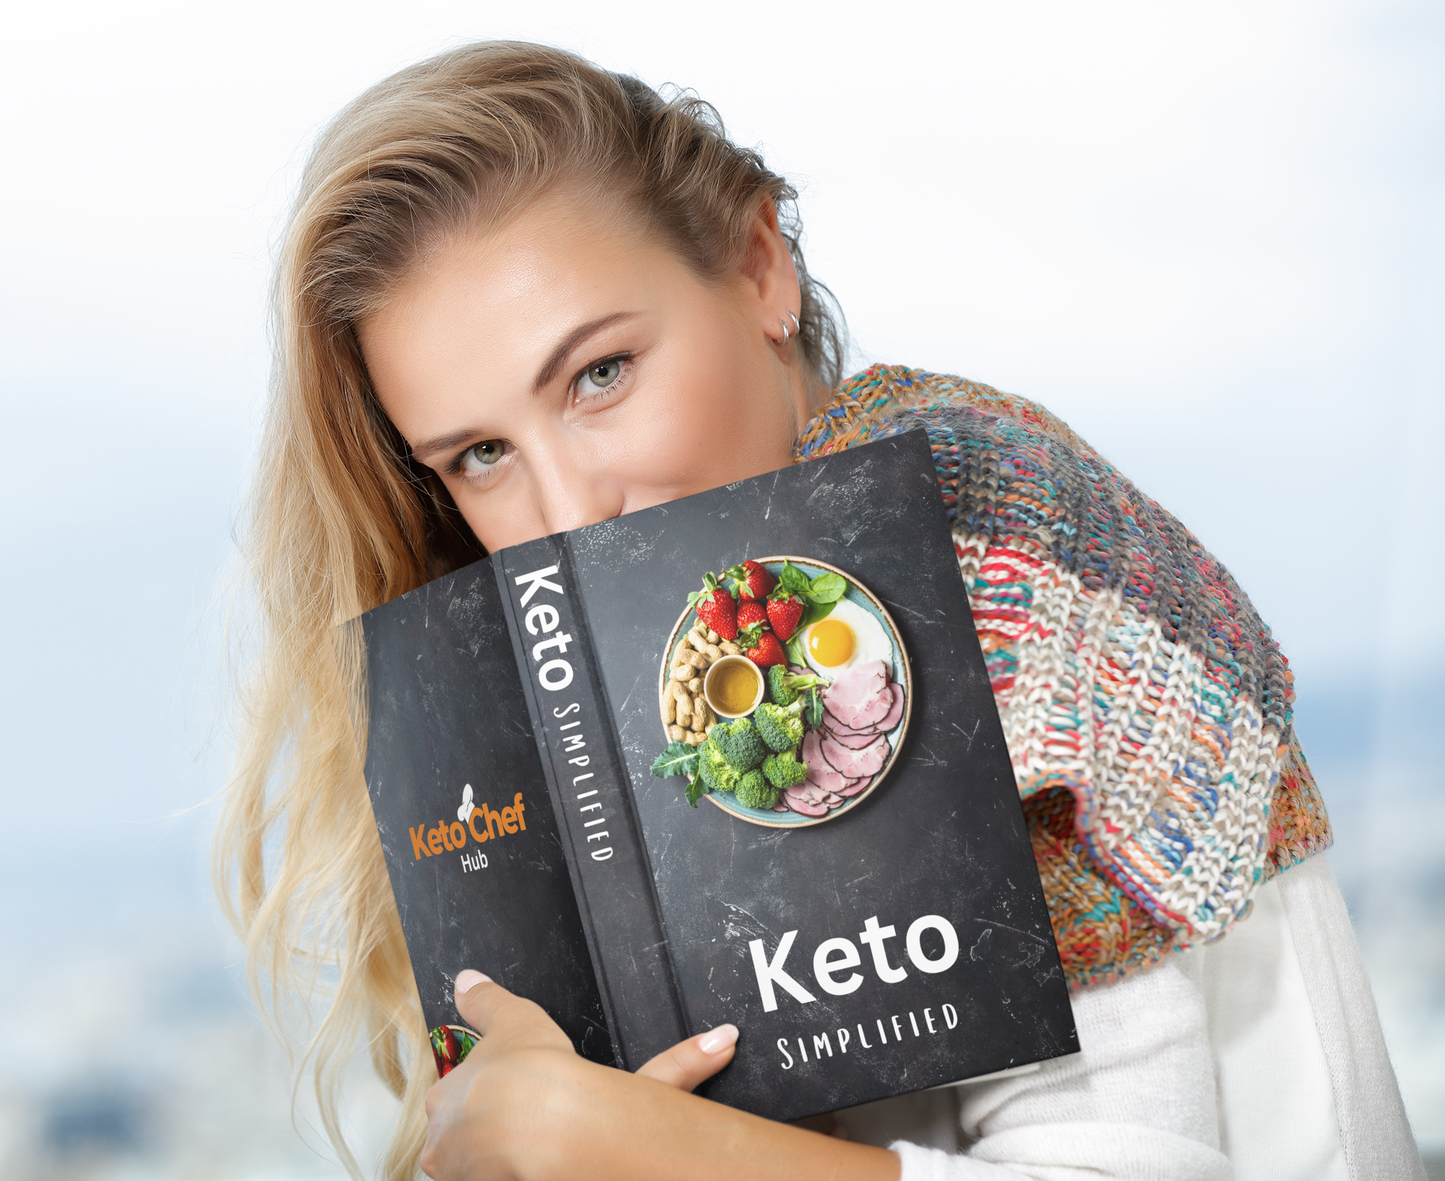 Keto Simplified: The Essential Guide to a Healthy Keto Lifestyle